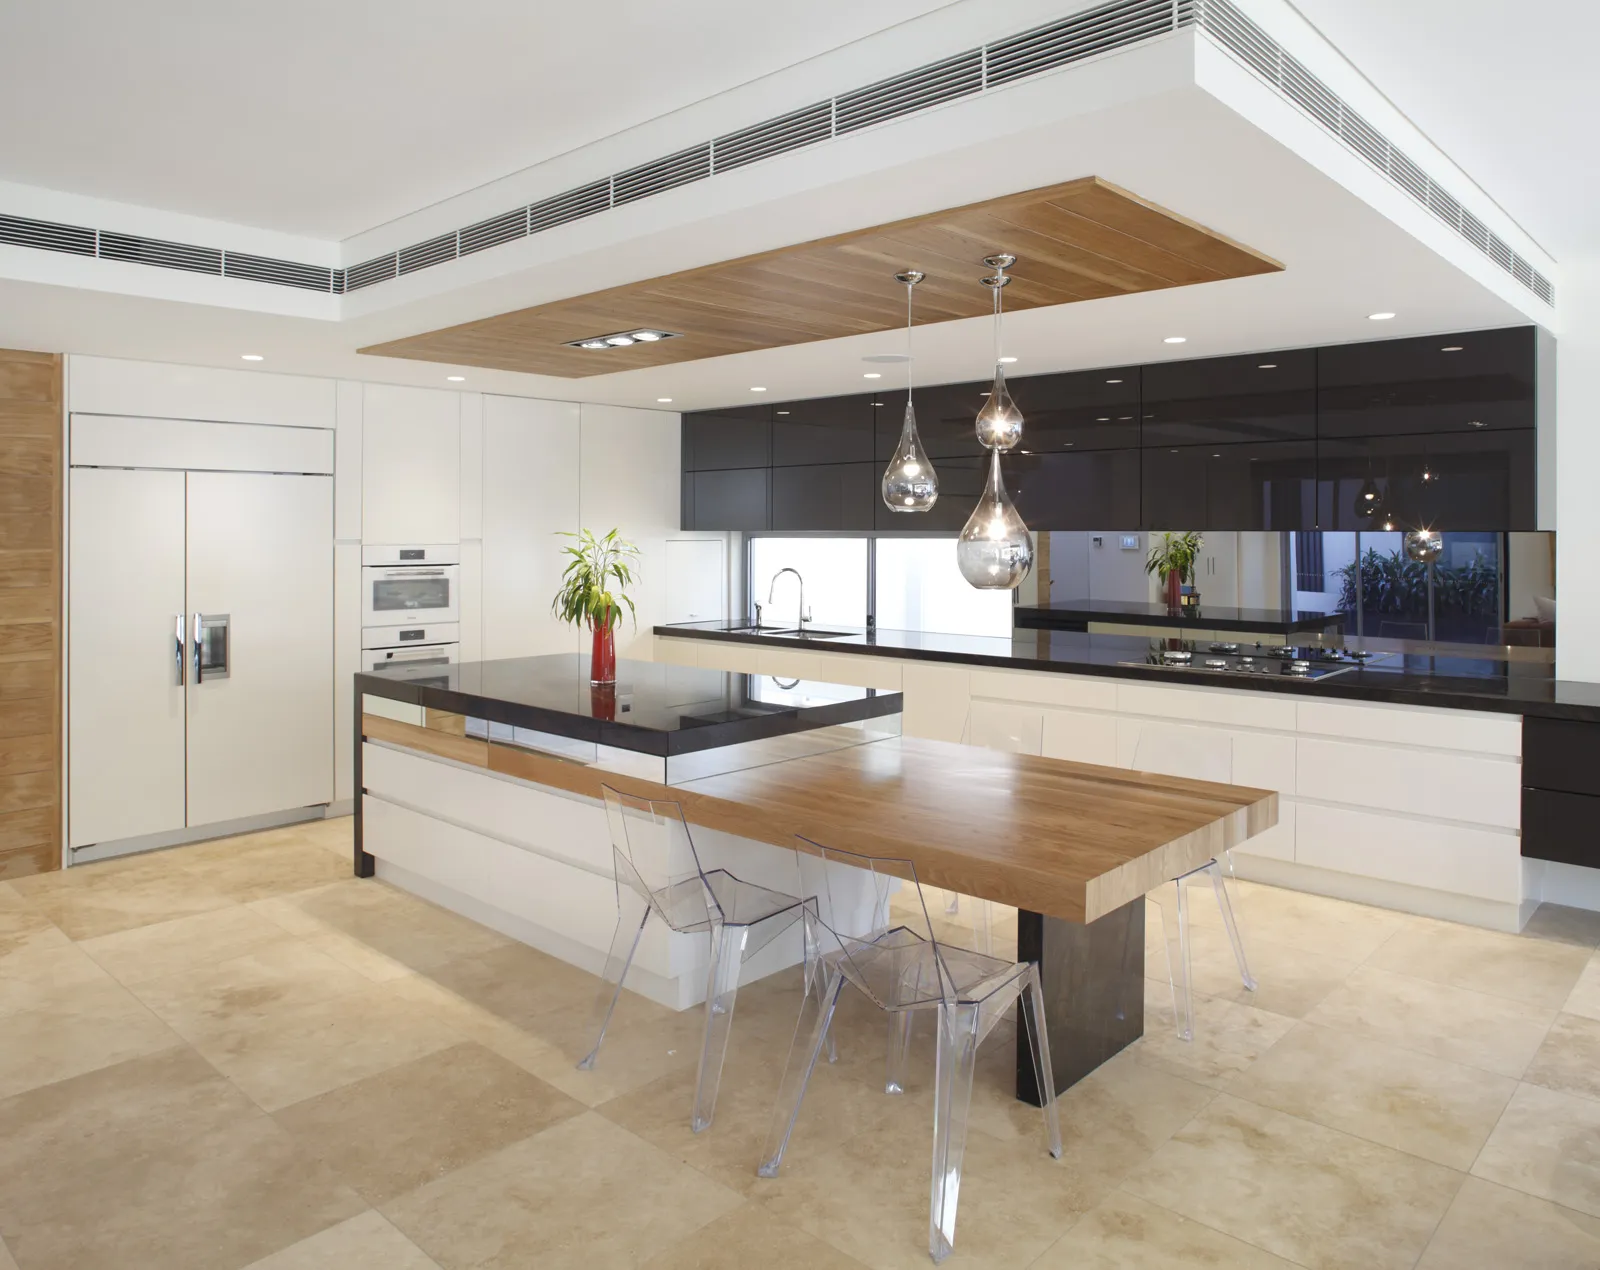 Kitchen Island Benches The Latest Trends & Designs   Wonderful ...